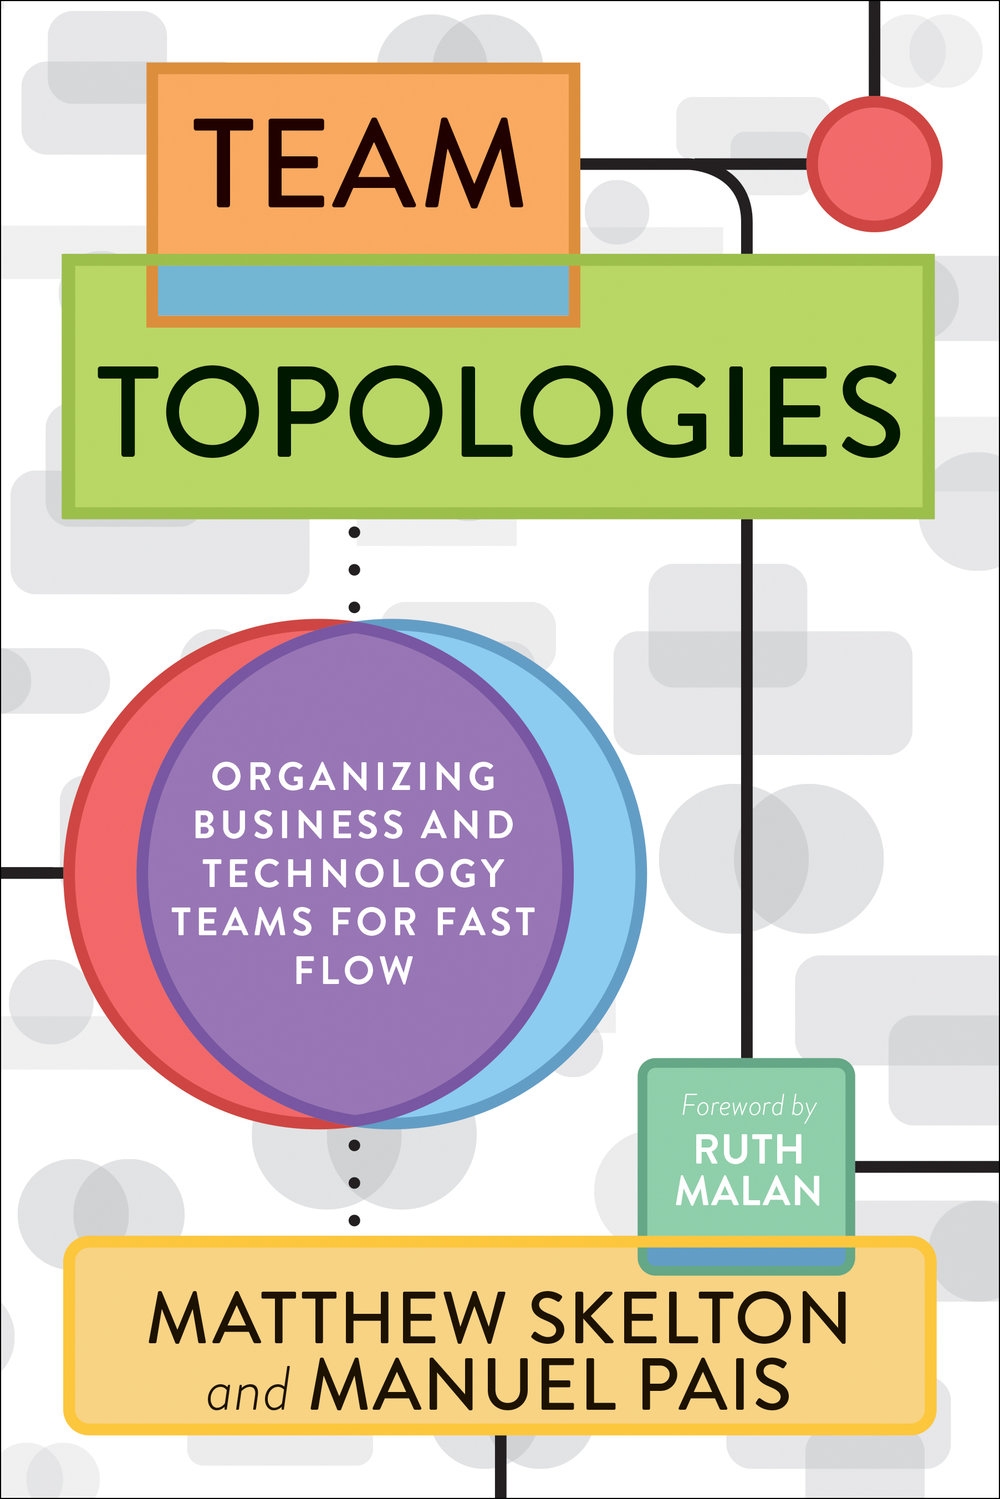 Team Topologies by Skelton and Pais